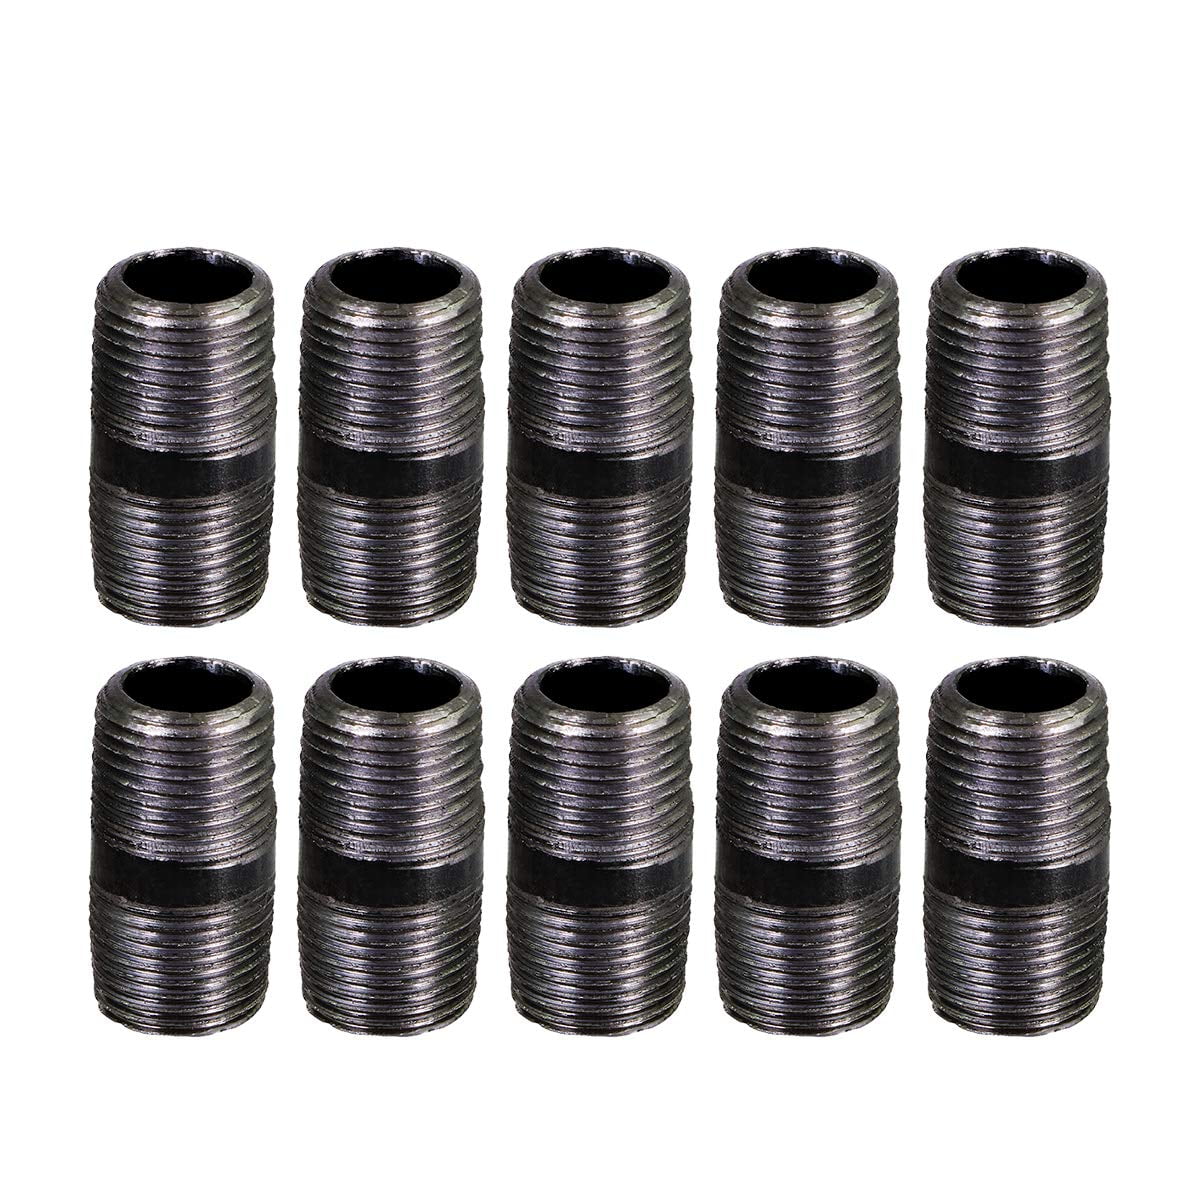 10 1/2" x Close Pack of Black Iron Malleable Gas Pipe Nipple Fitting 